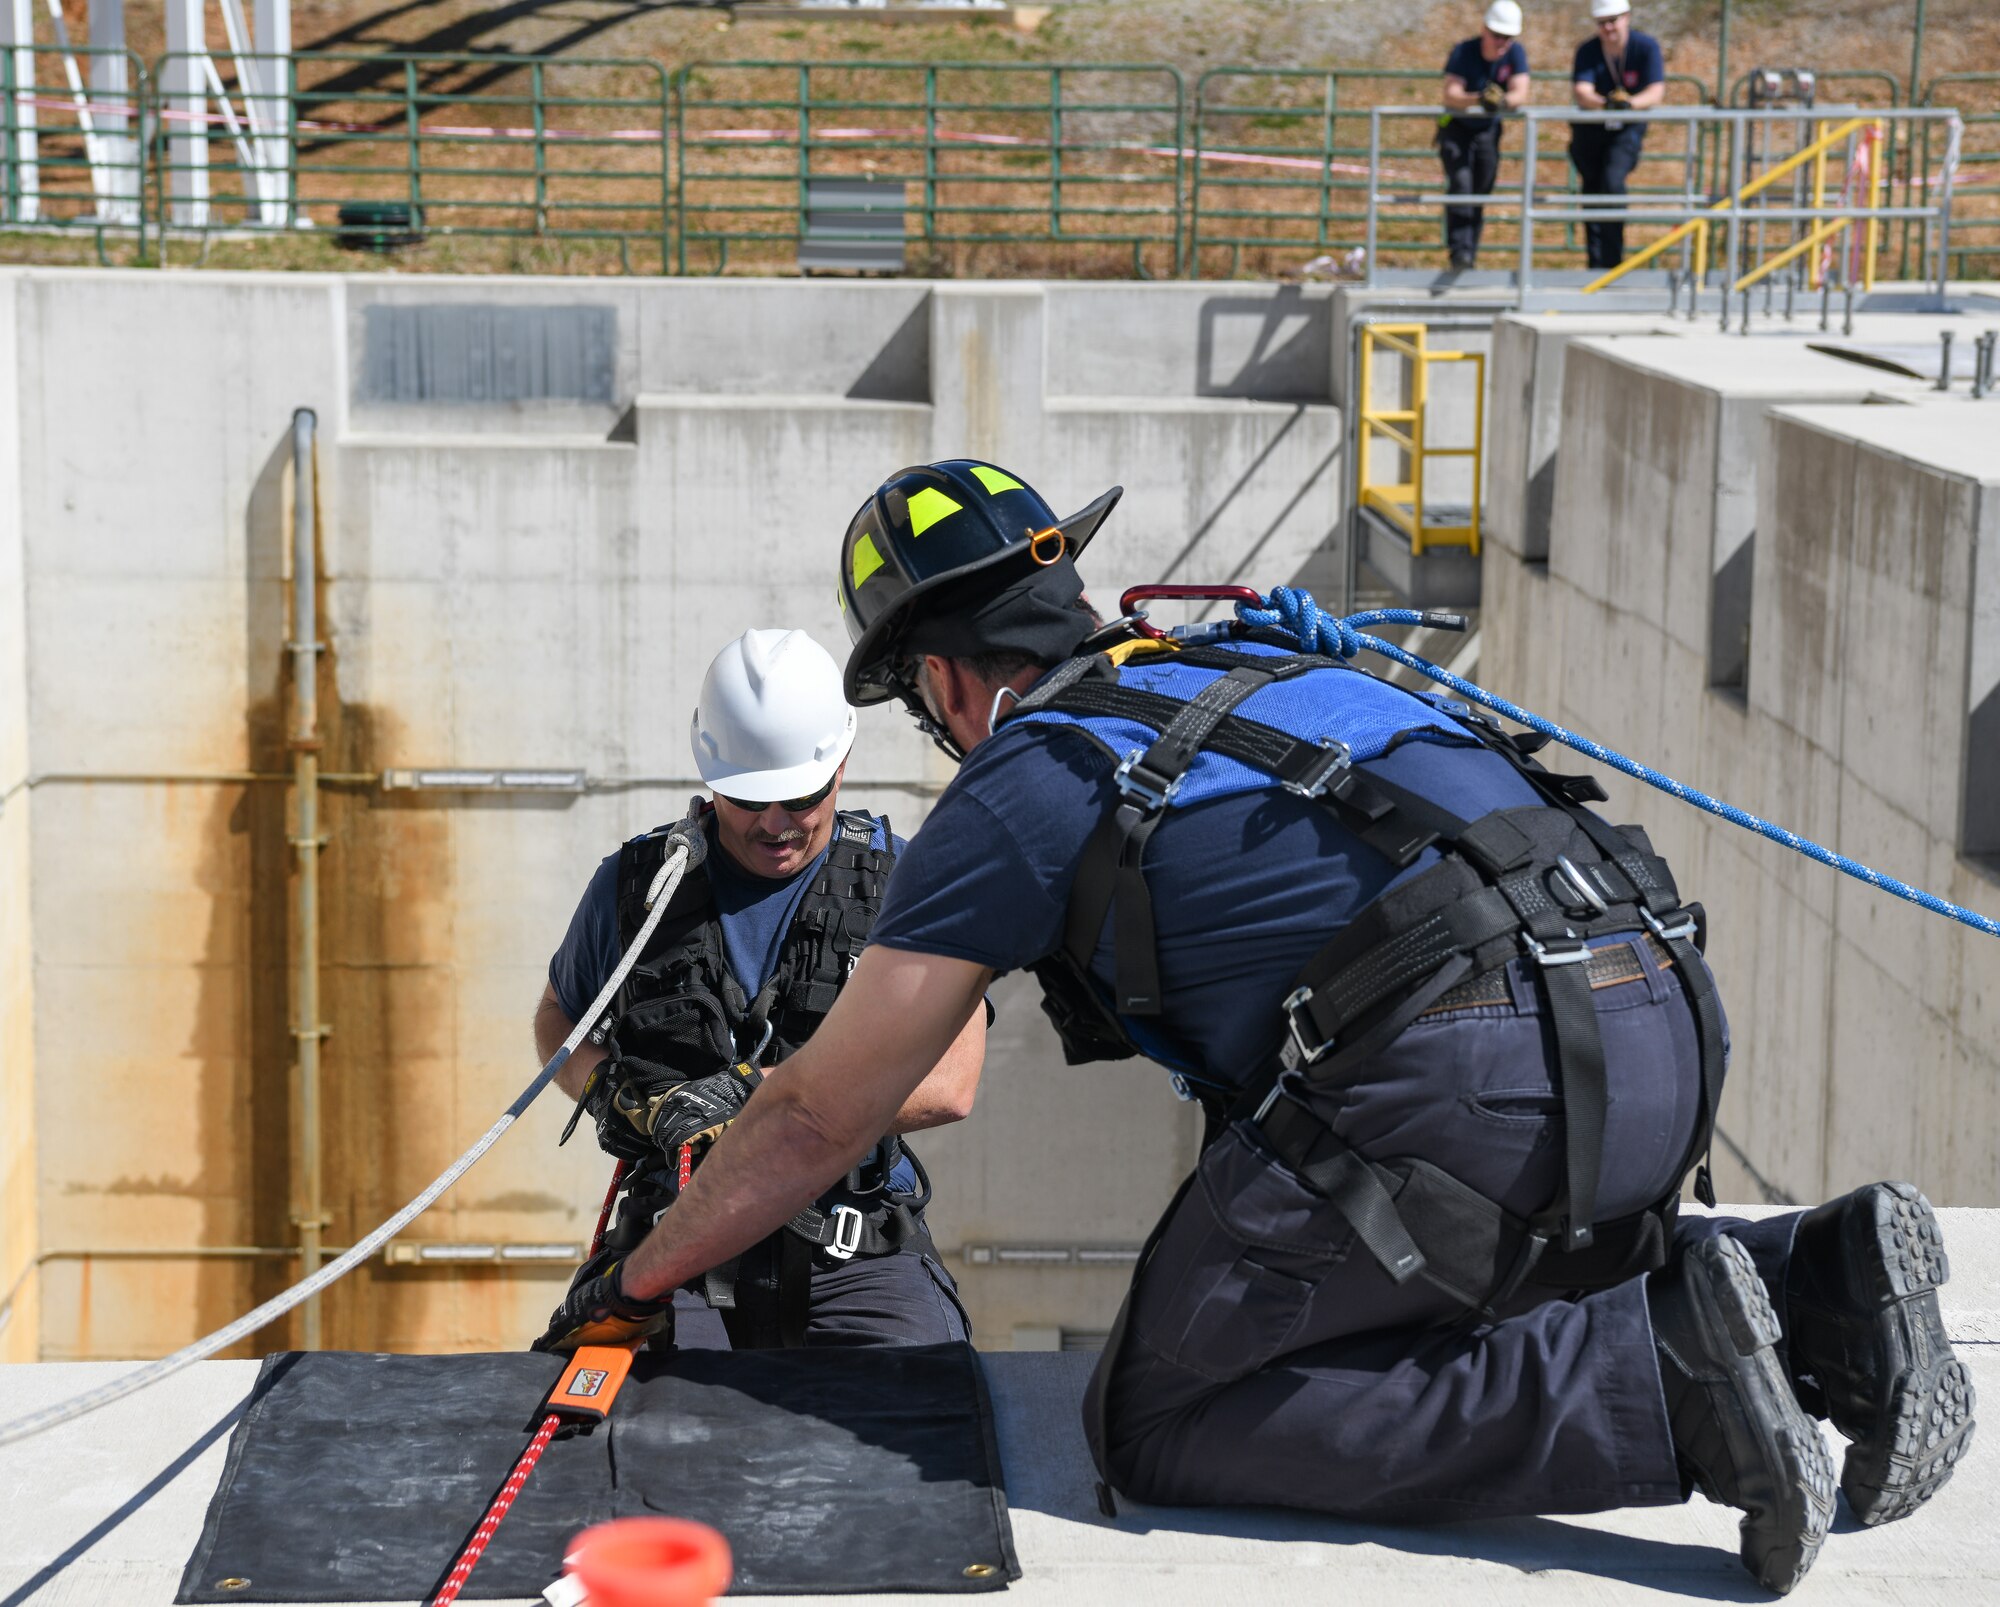 Firefighter positions rope guard as other firefighter rappels